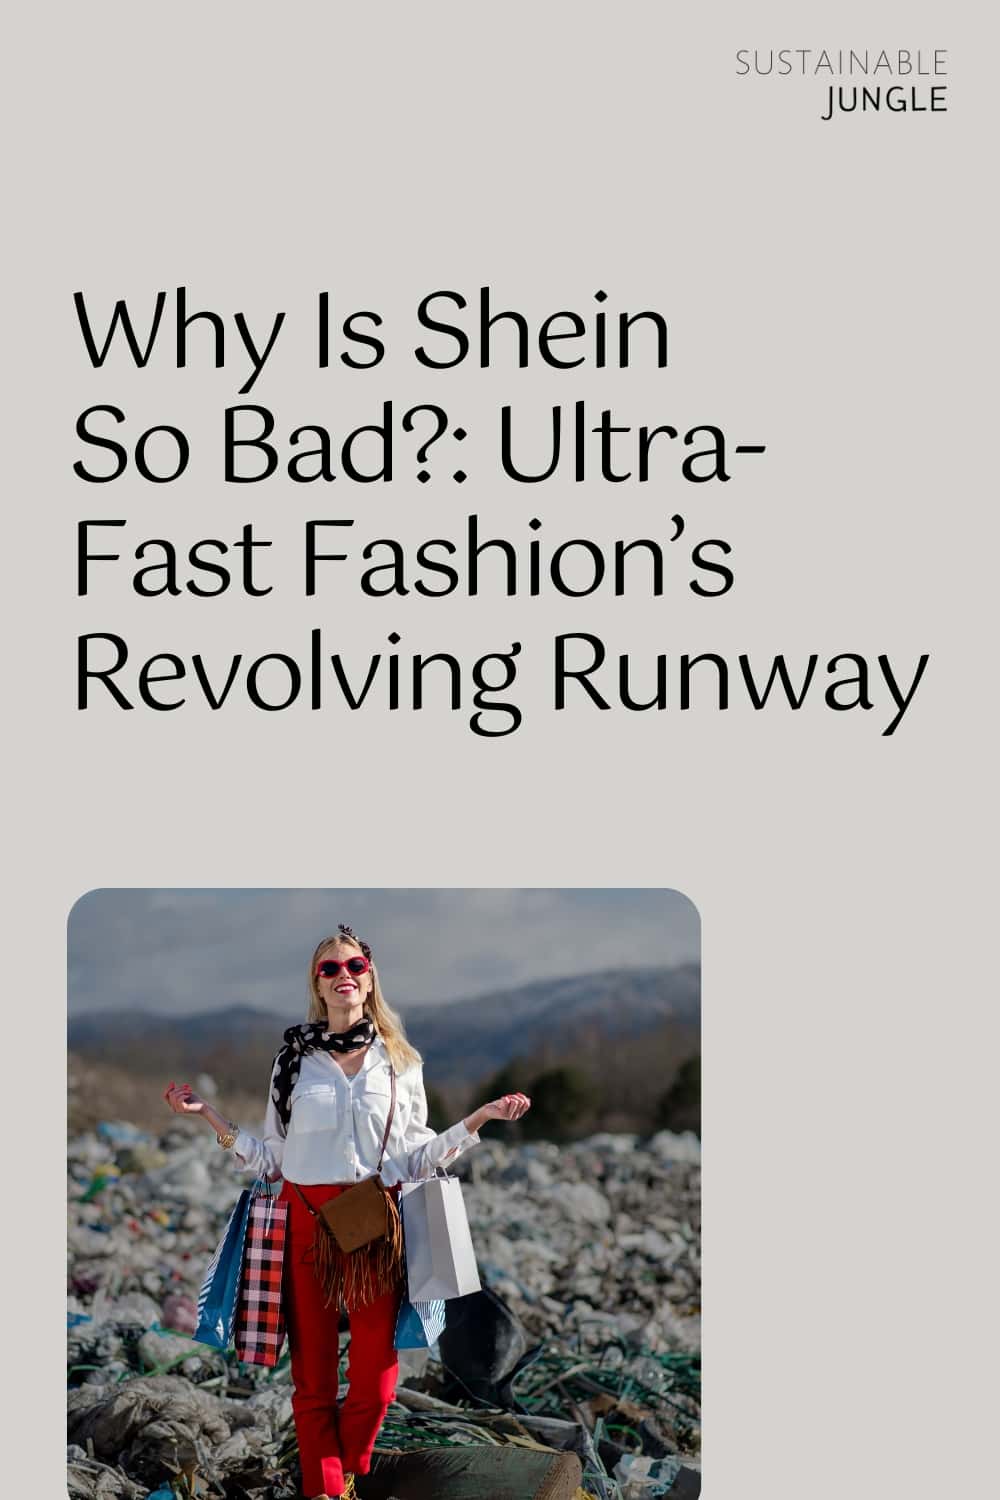 Why Is Shein So Bad?: Ultra-Fast Fashion’s Revolving Runway Image by halfpoint #whyissheinsobad #issheinethical #shein ethical issues #shein sustainability #issheinbad #howbadishein #sustainablejungle